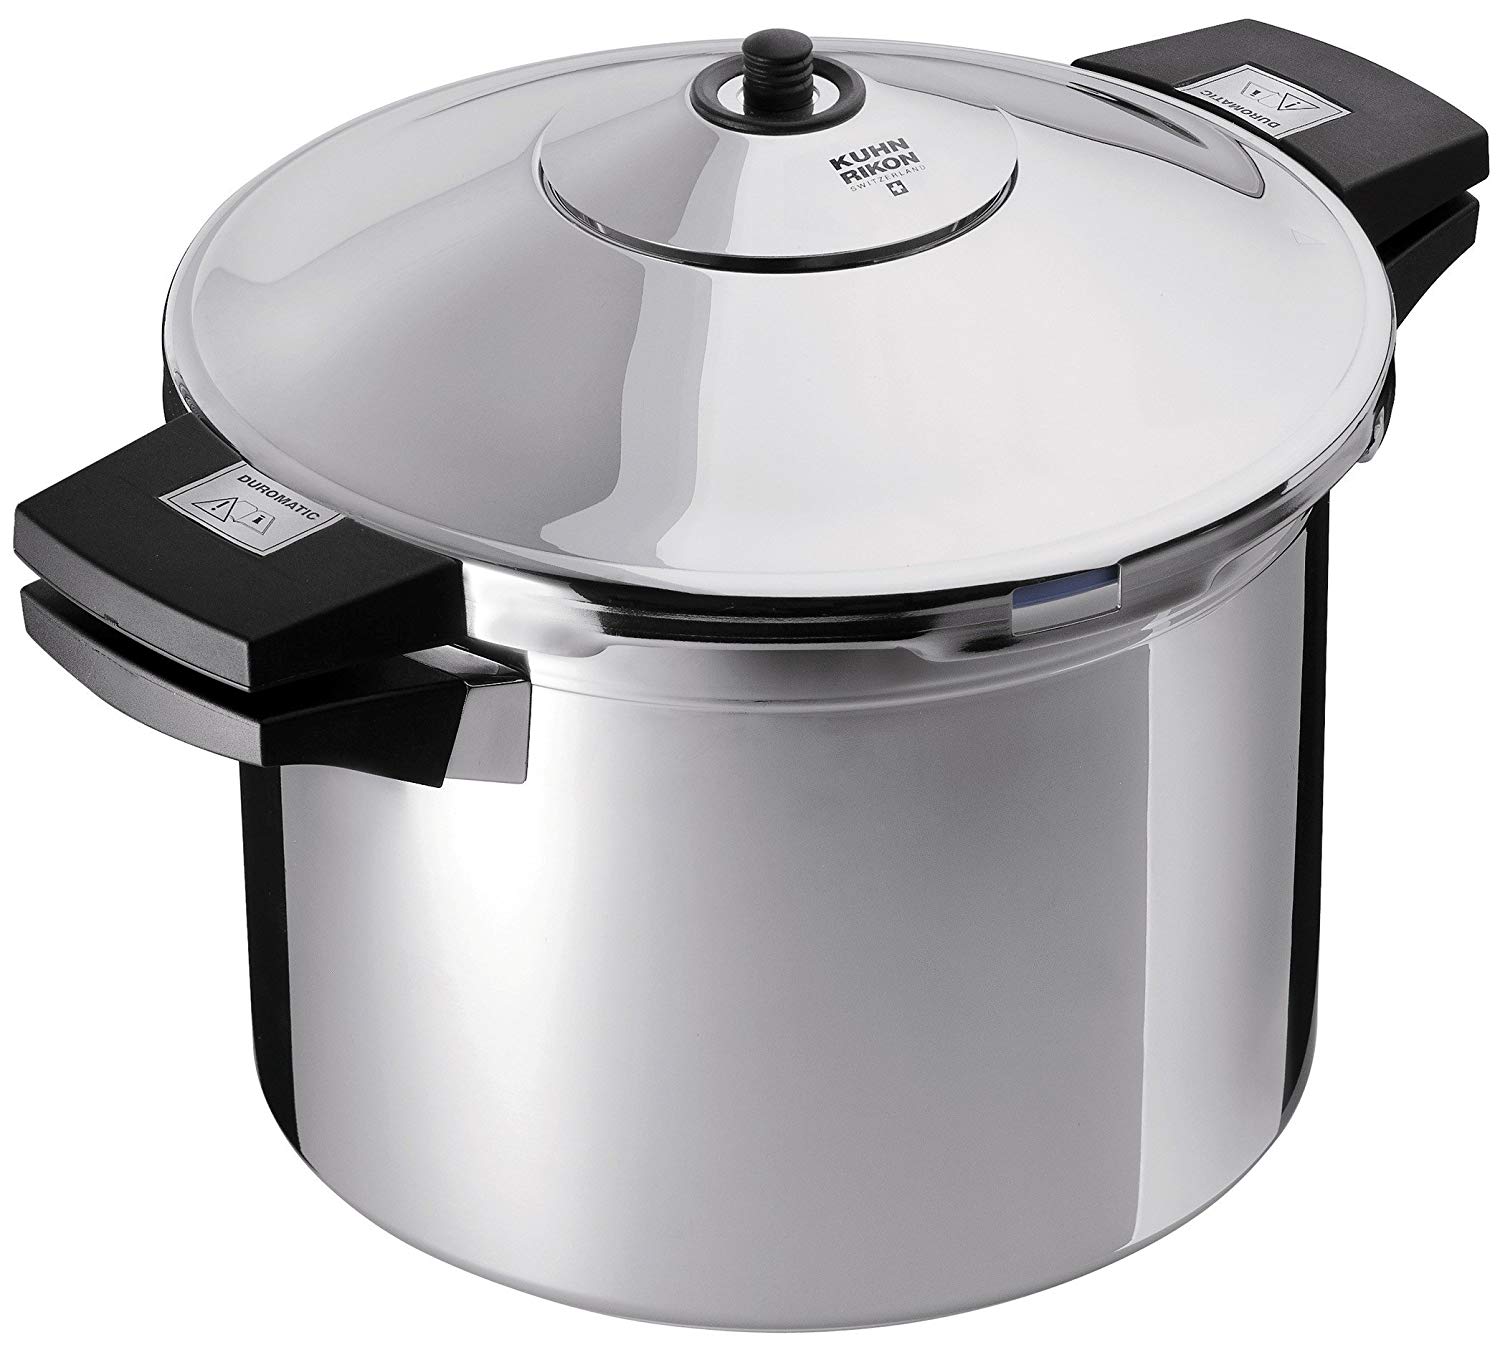 Kuhn Rikon Duromatic Inox Pressure Cooker With Side Grips (24 cm), 6.0 Litr